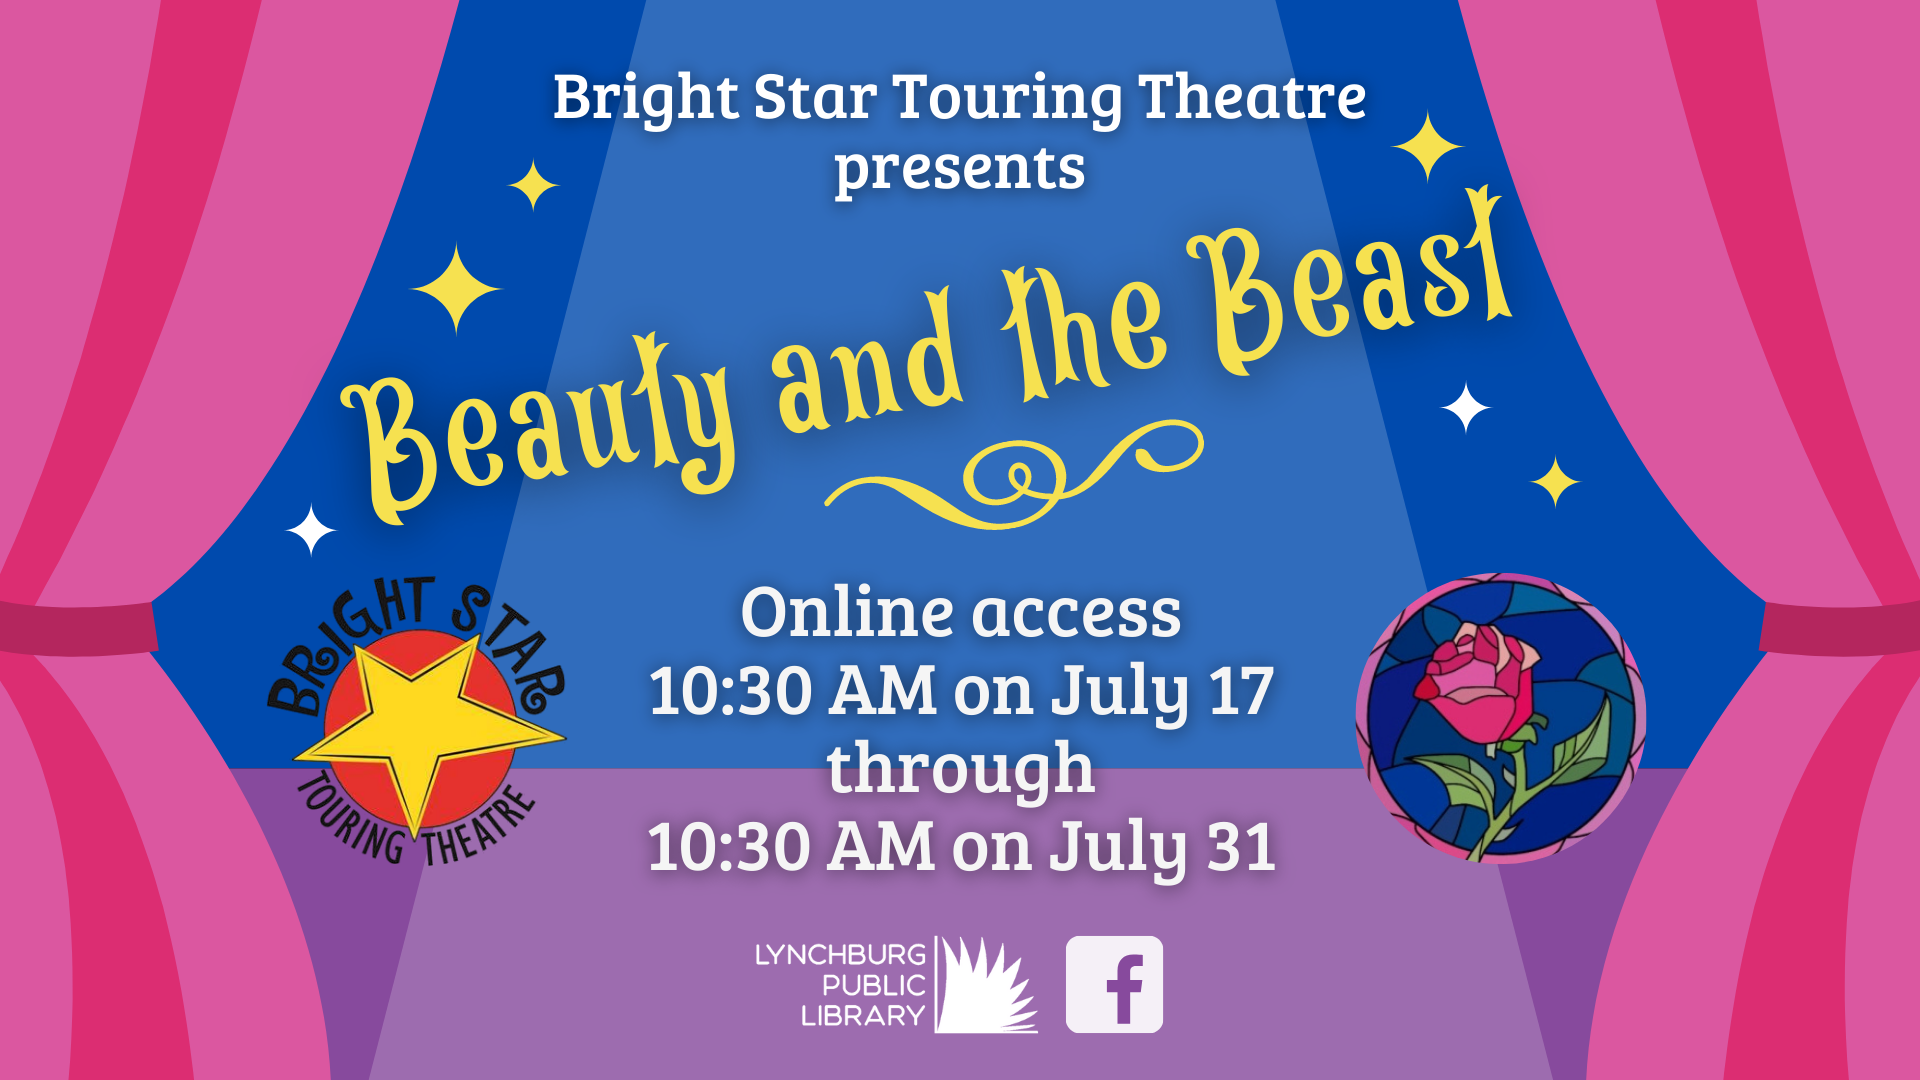 Image features a pink, purple, and blue theatrical stage with the Beauty and the Beast program title and the same date and time details listed in this event description.